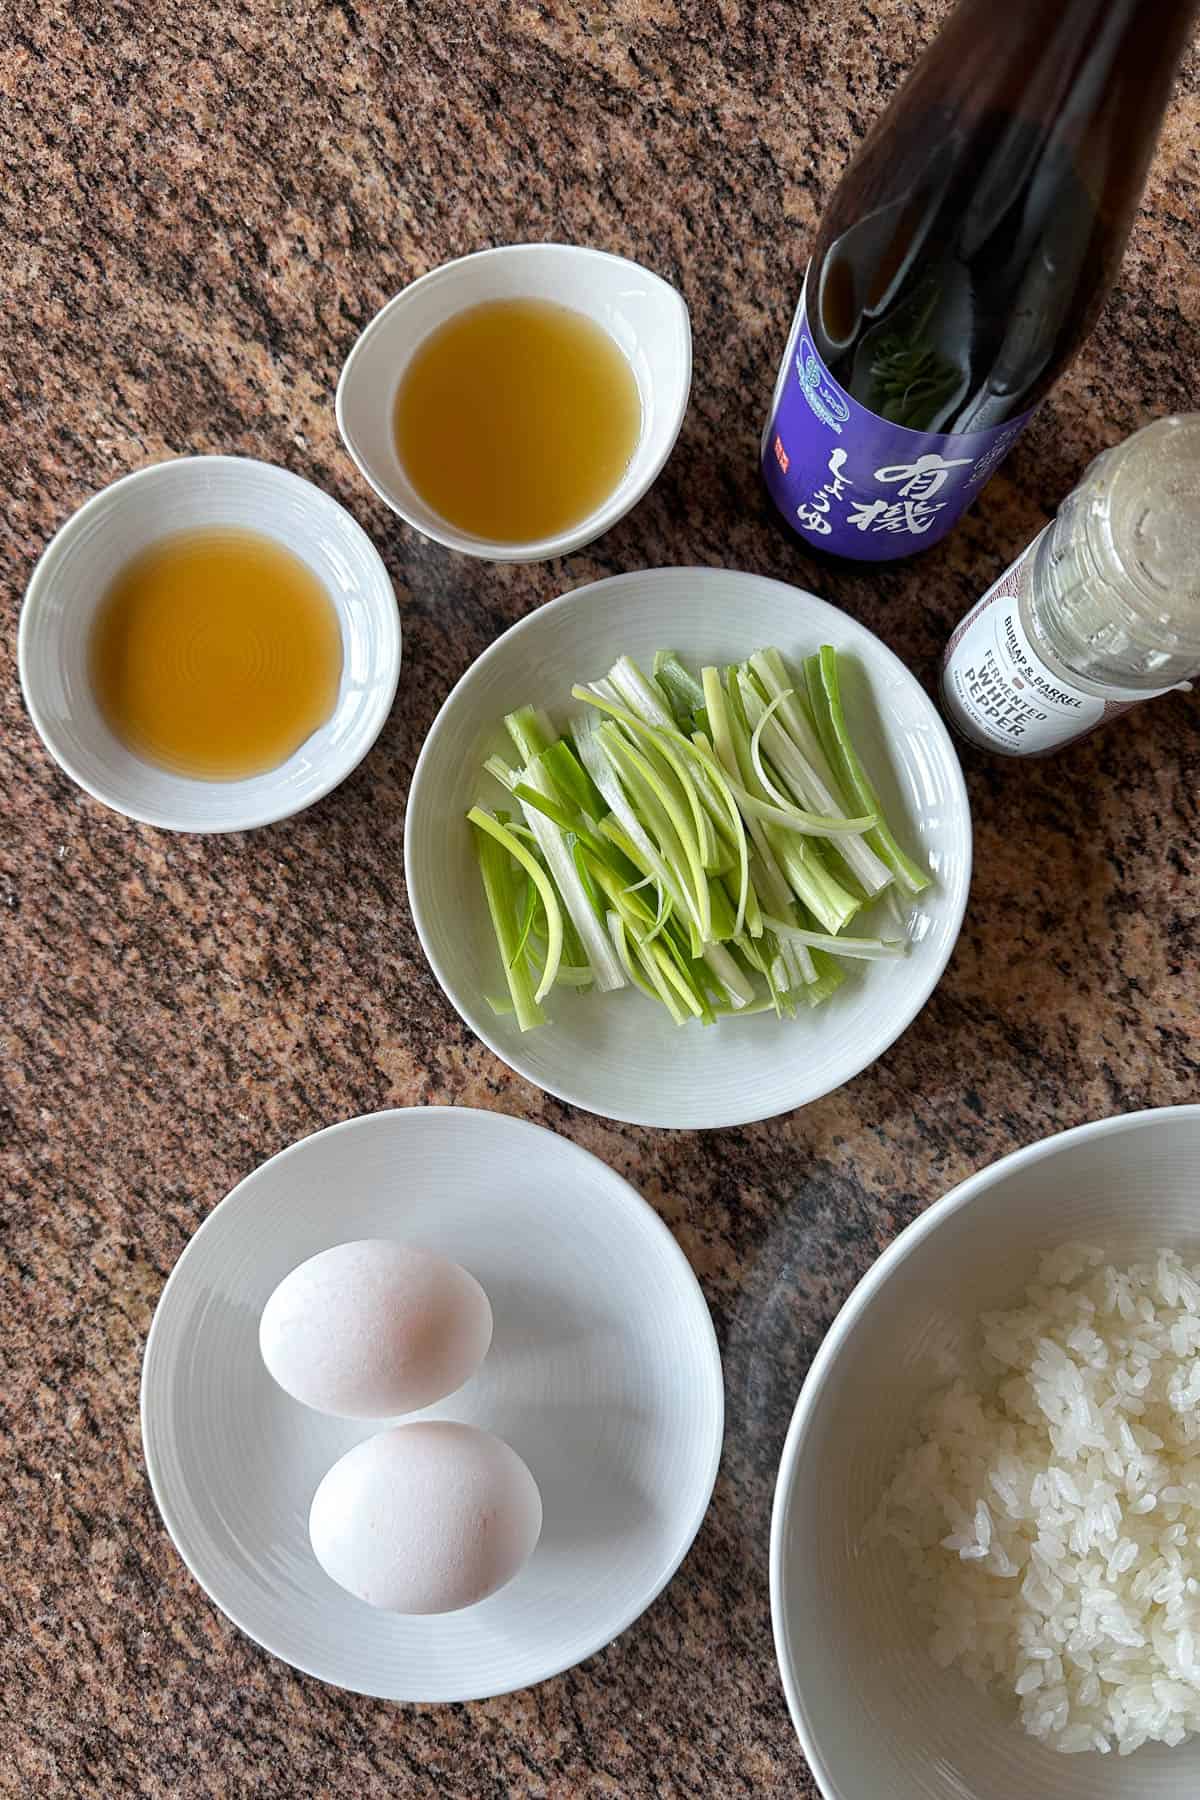 Ingredients for making Scallion Eggs.